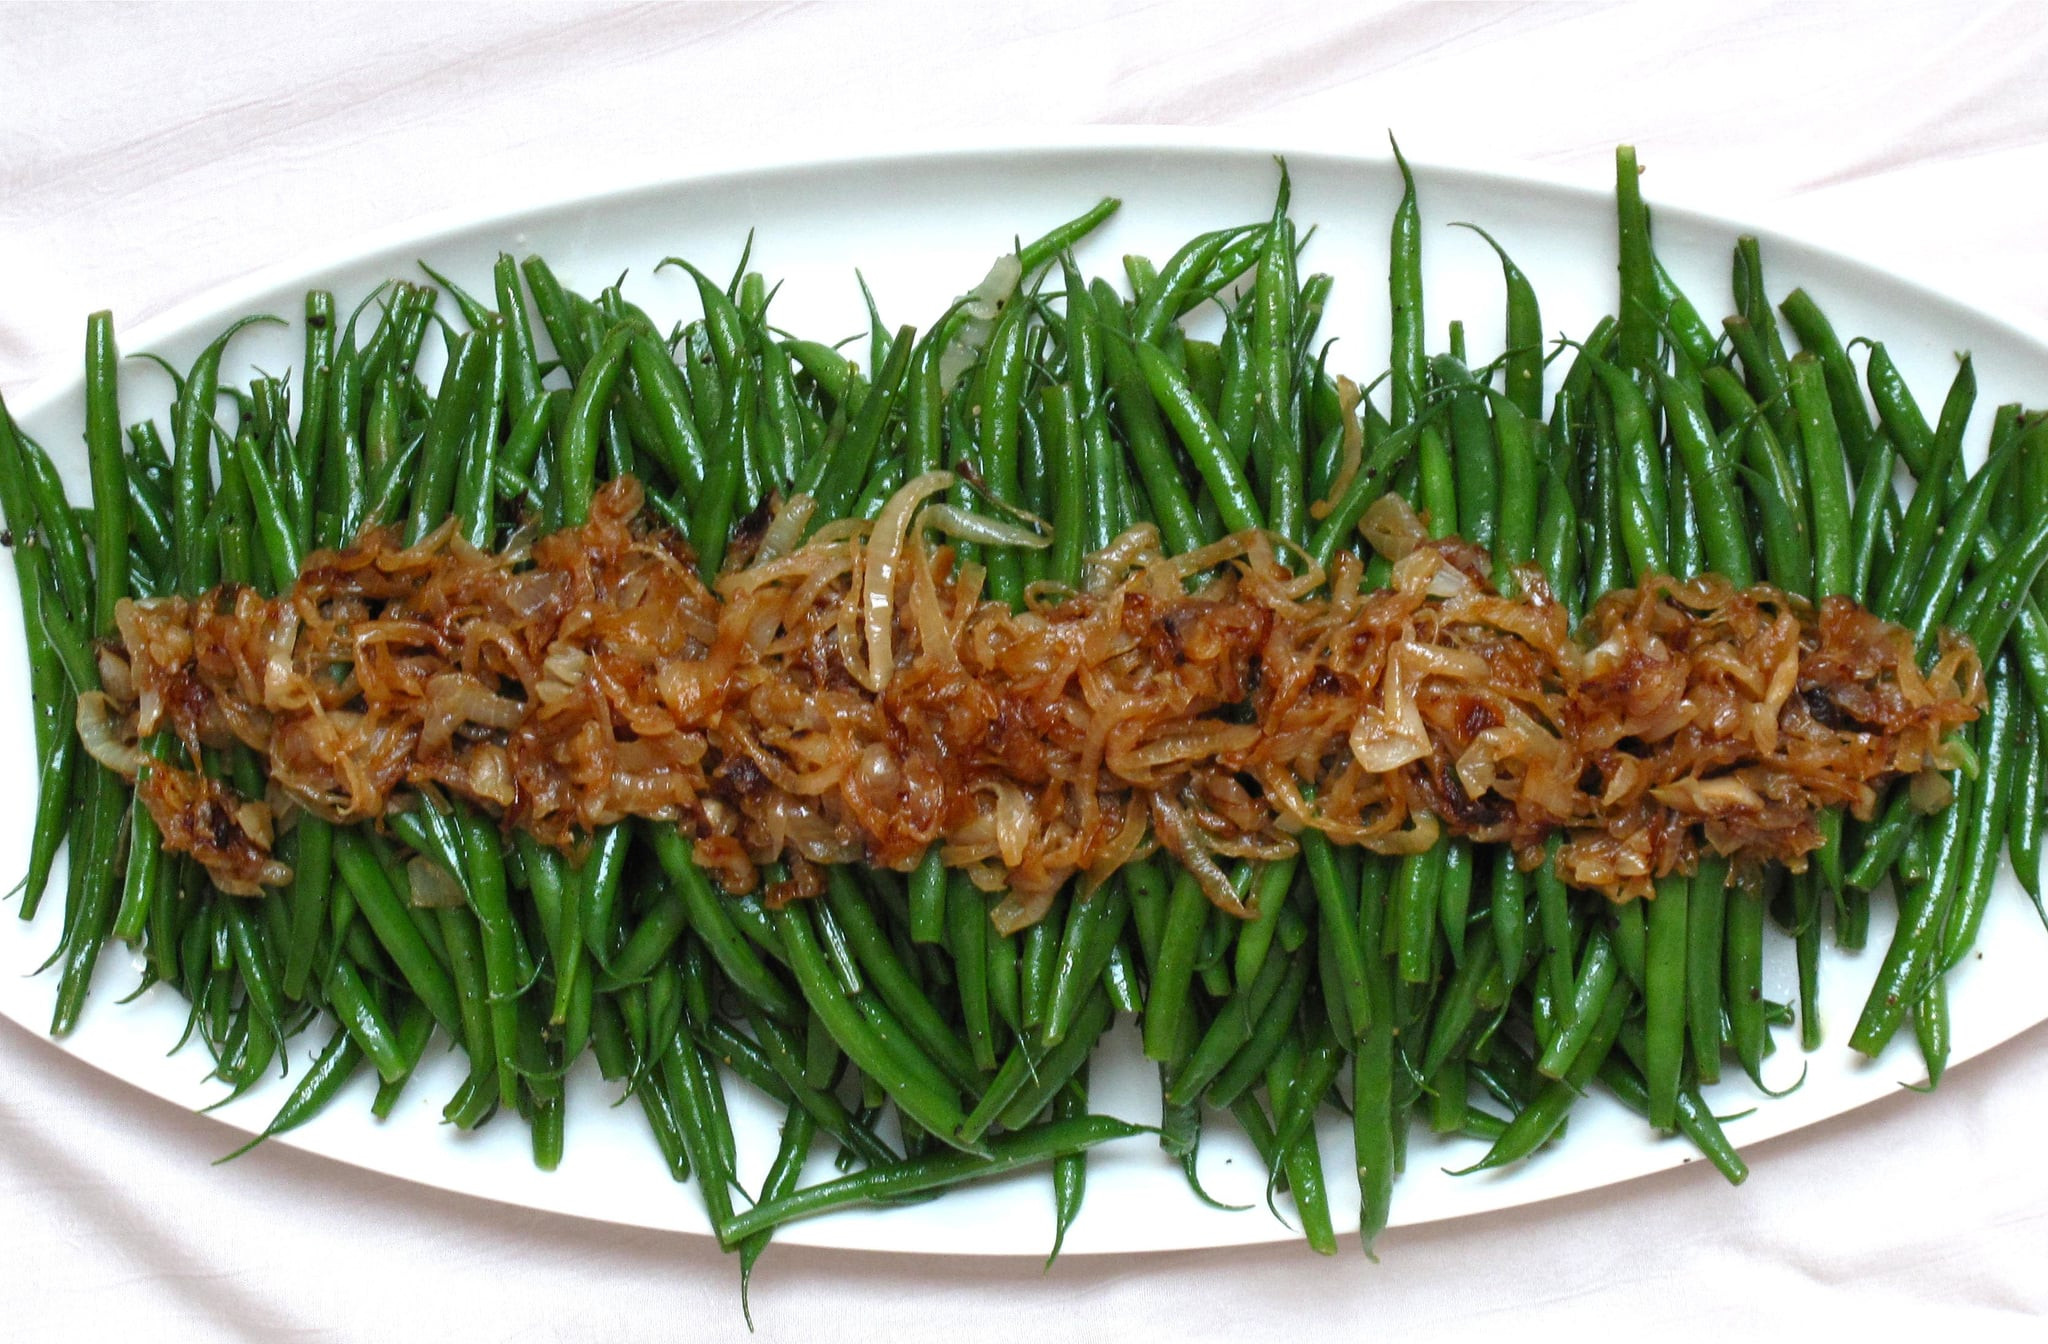 Best Green Bean Recipe For Thanksgiving
 Green Beans With Caramelized ions Recipe